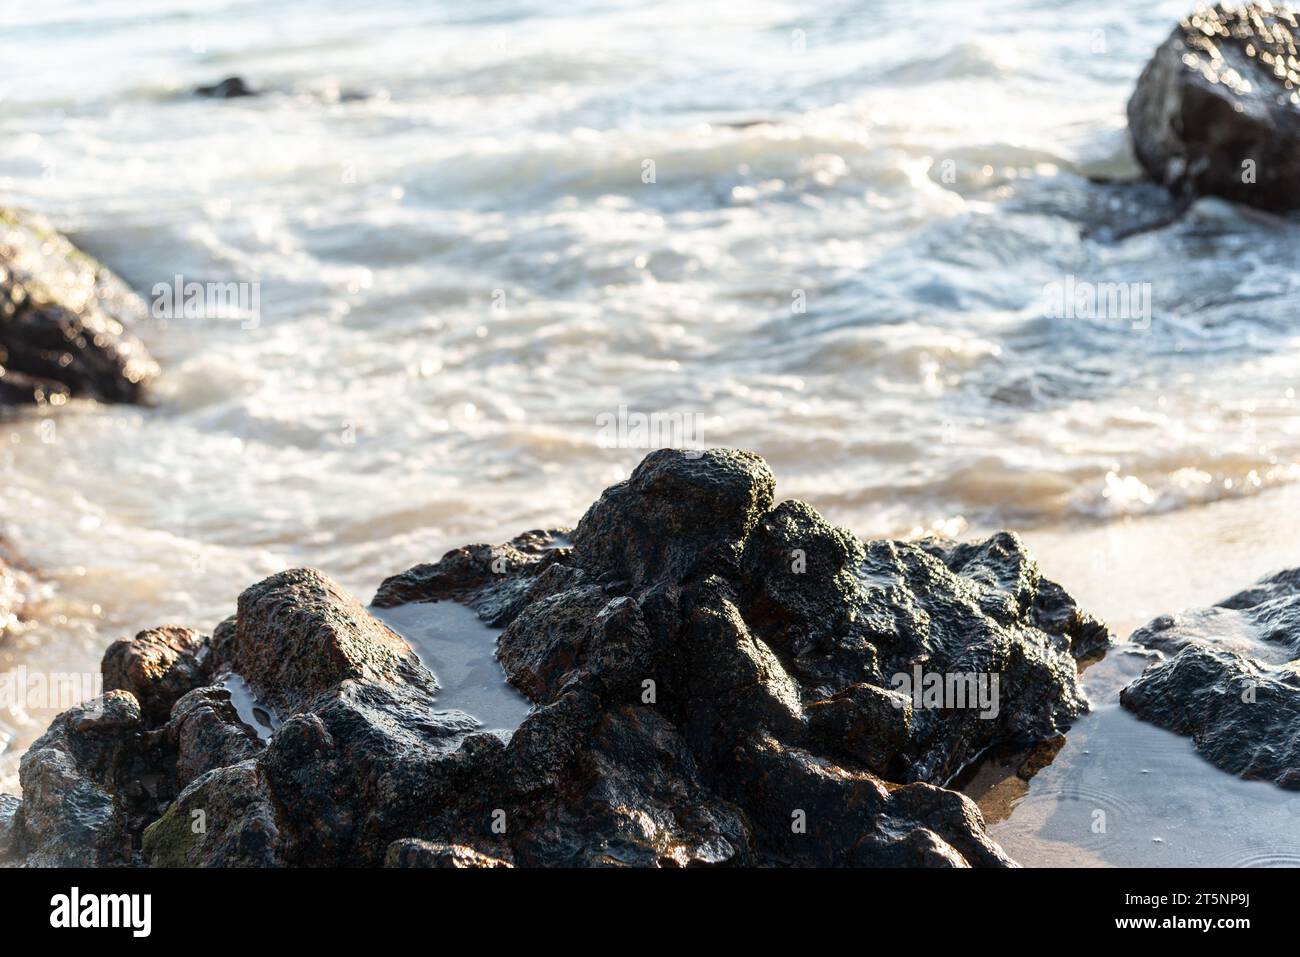 Sea waves lapping gently on the dark rocks of the beach. Preserved and alive nature. Stock Photo